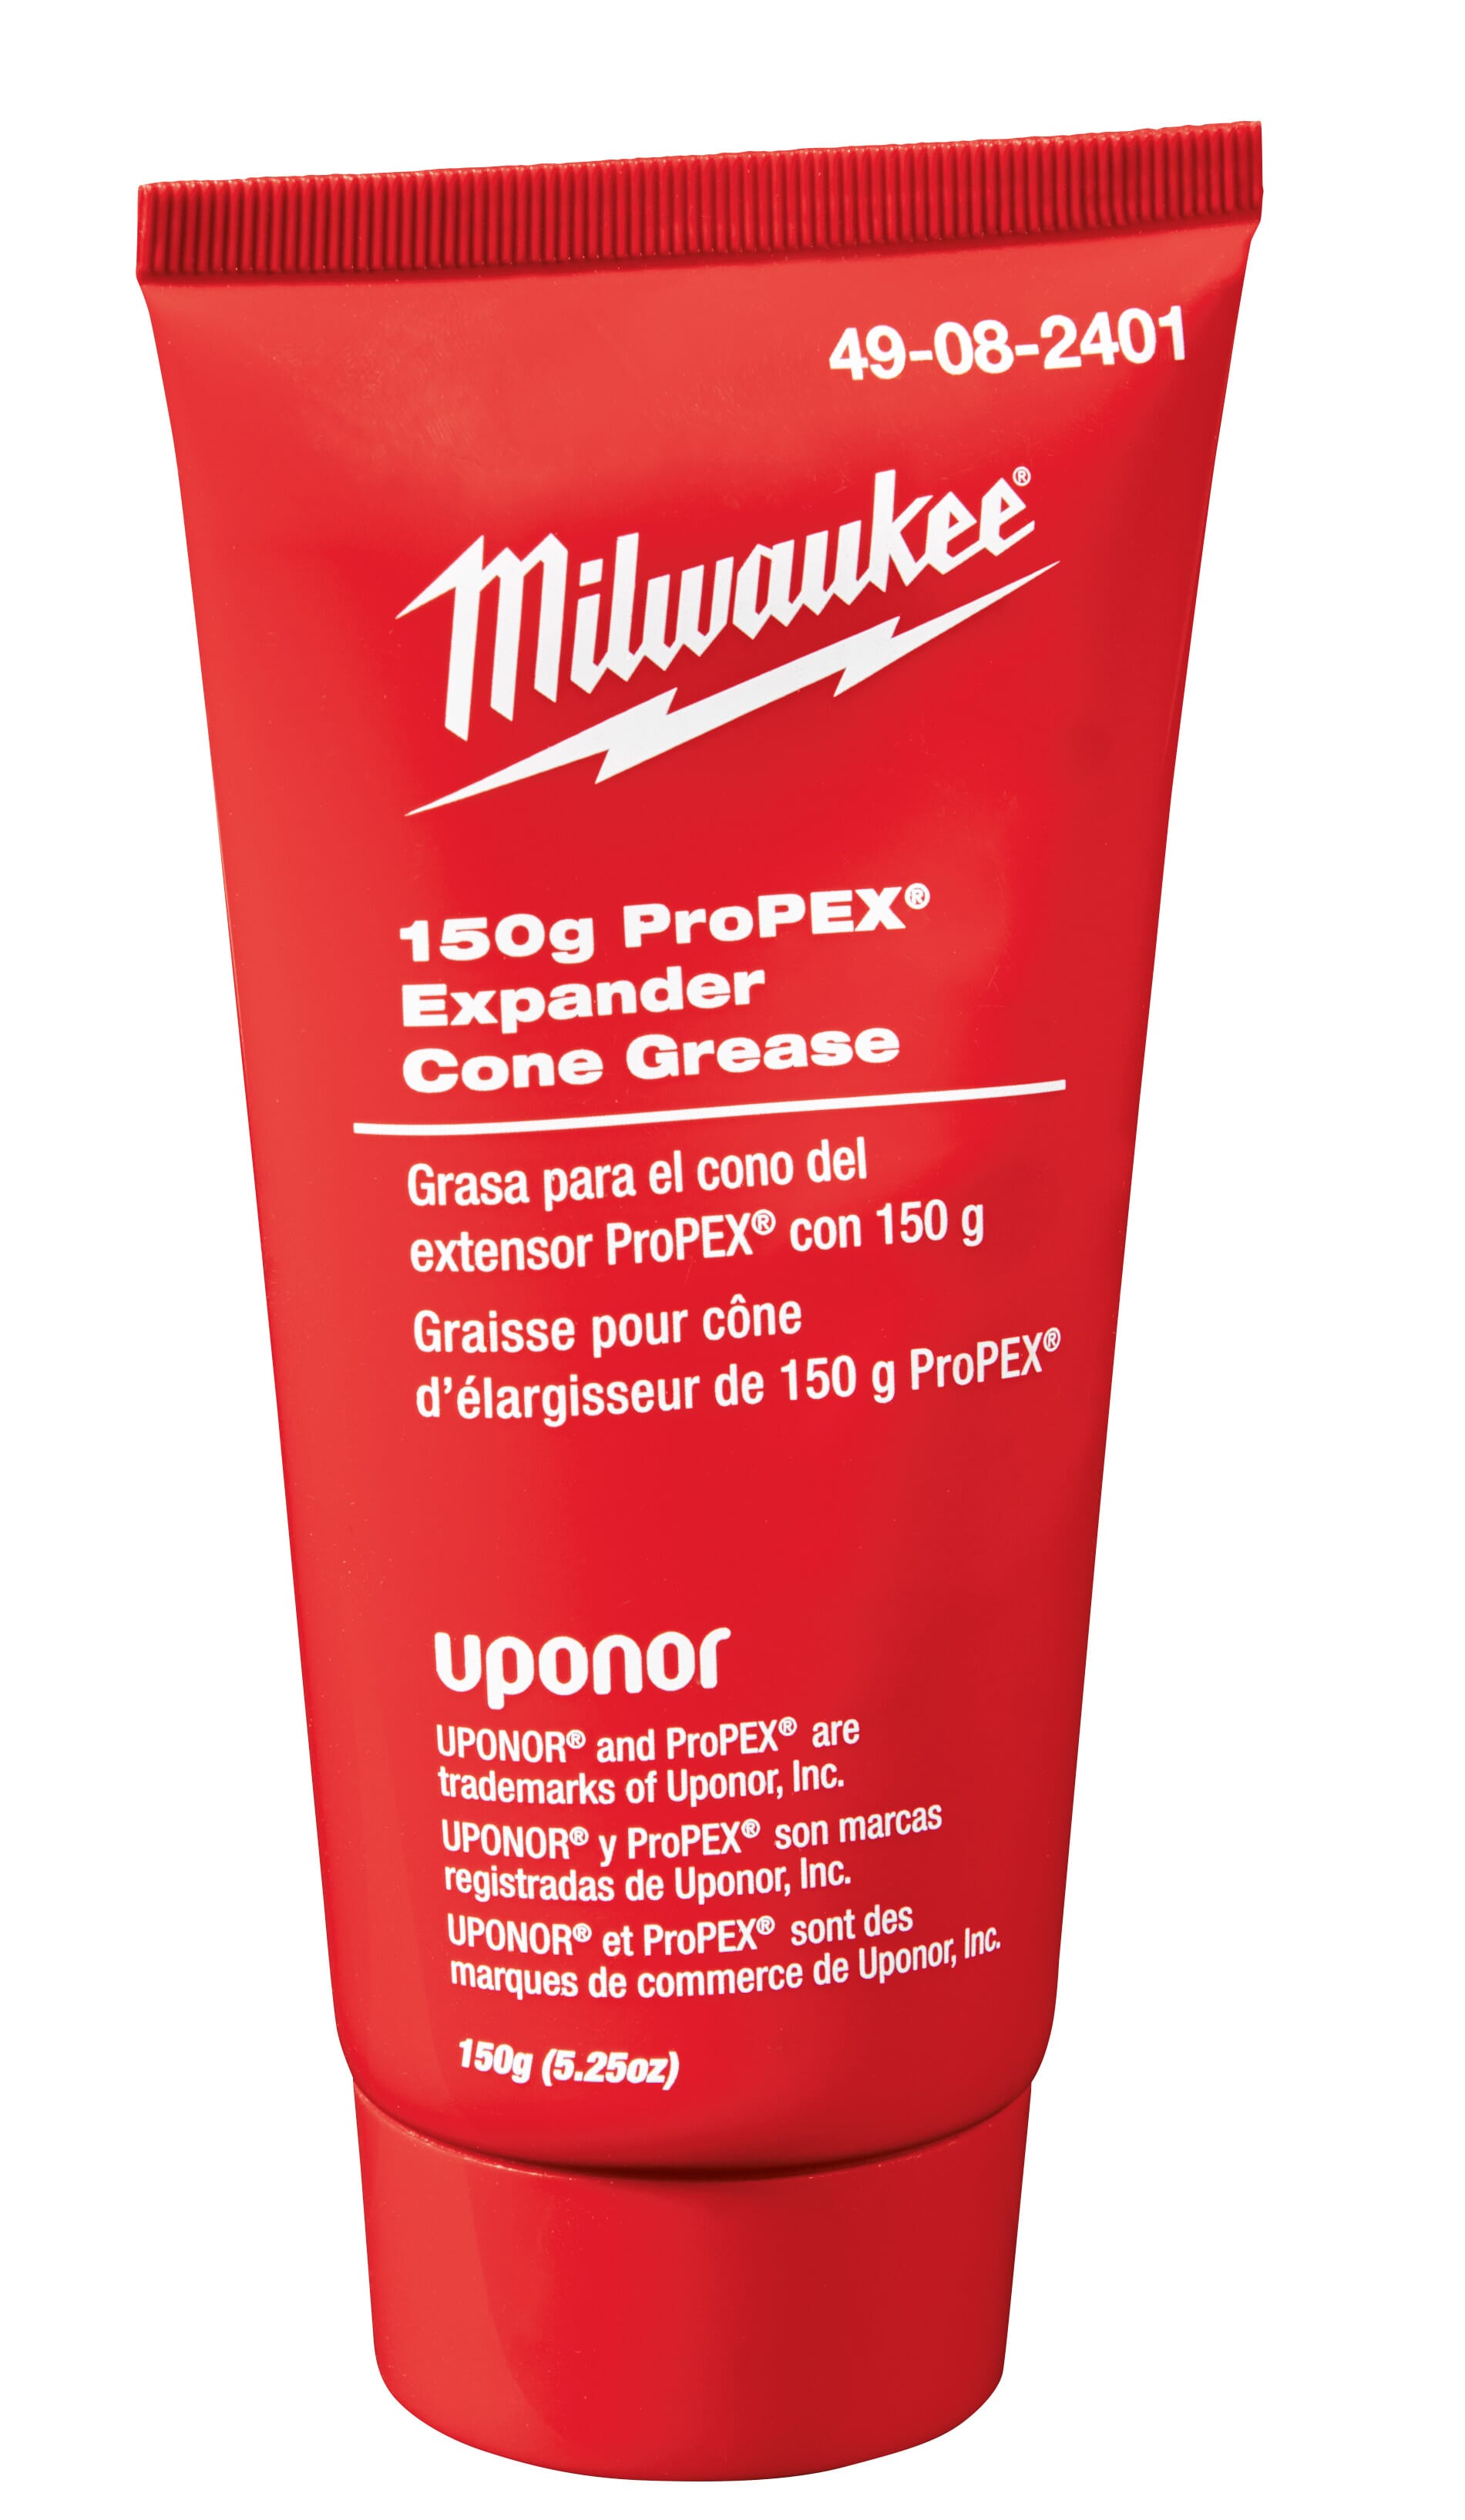 Milwaukee® ProPEX® 49-08-2401 Expander Cone Grease, 150 g Tube, Red, 392 deg F